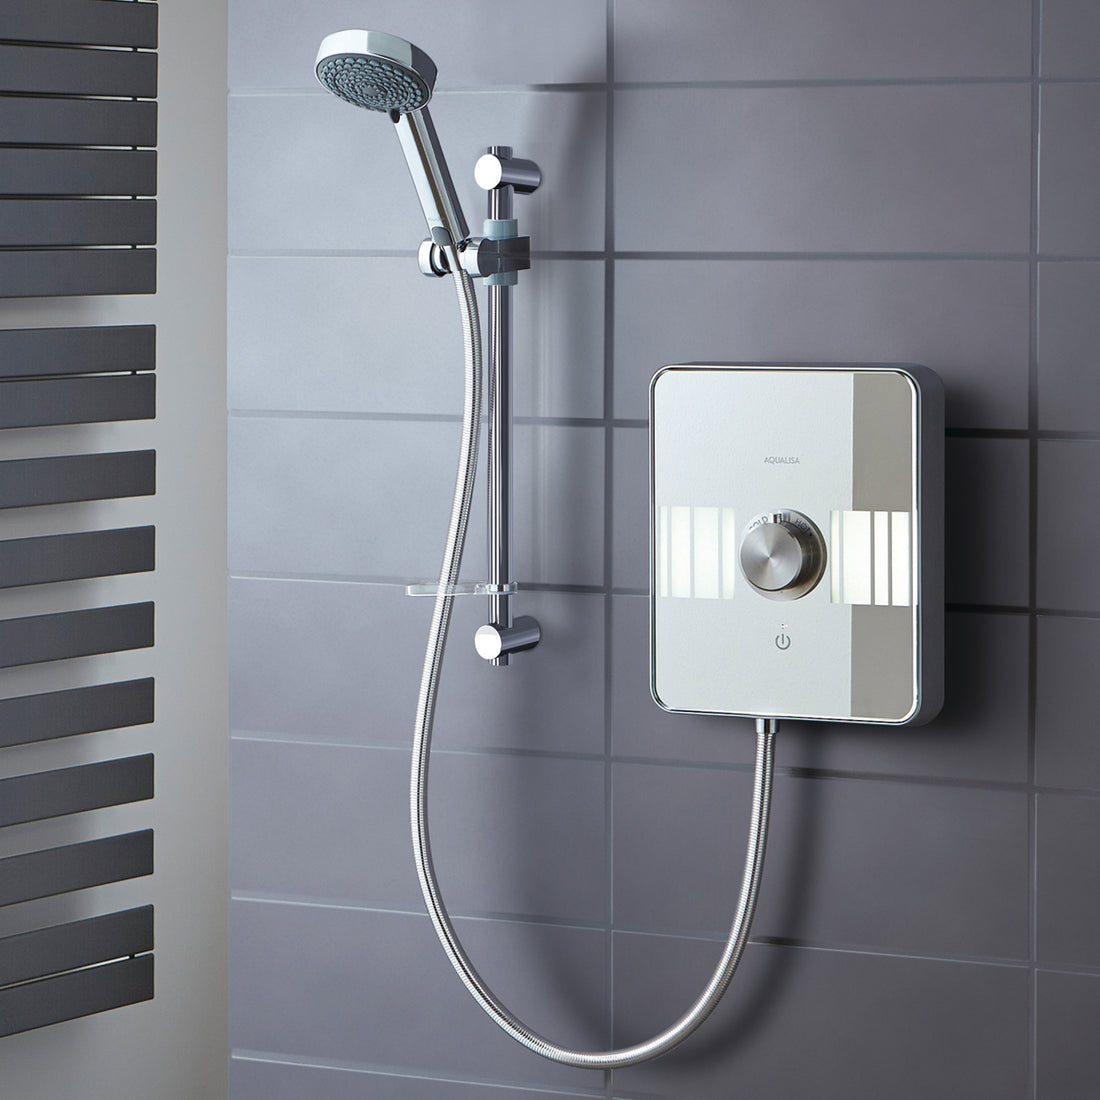 Aqualisa Lumi Electric 9.5Kw Shower With Adjustable Head against grey wall panels LME9501